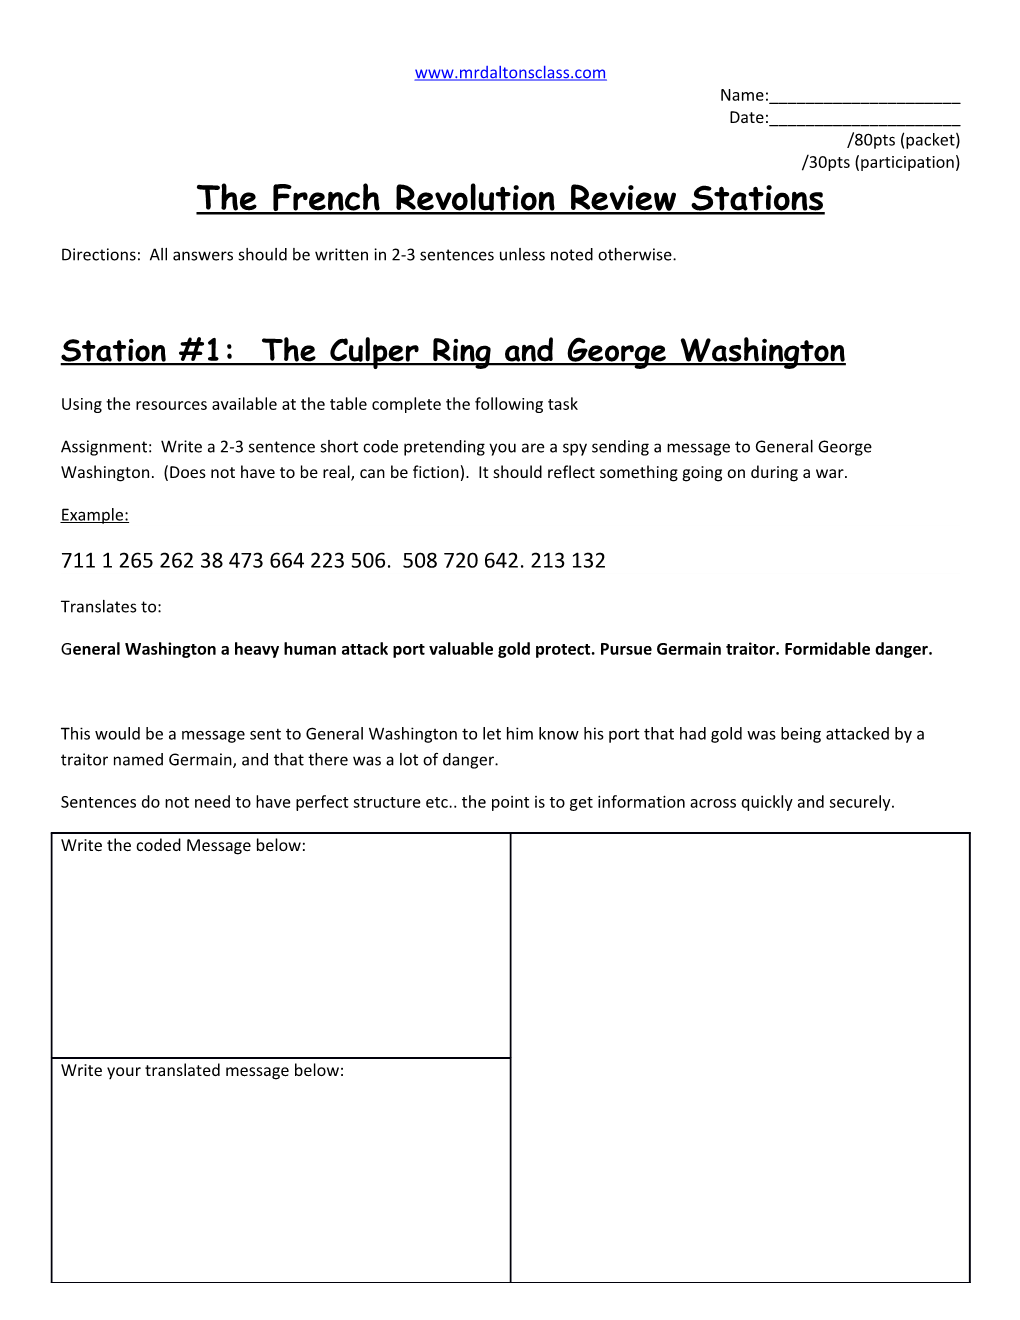 The French Revolution Review Stations